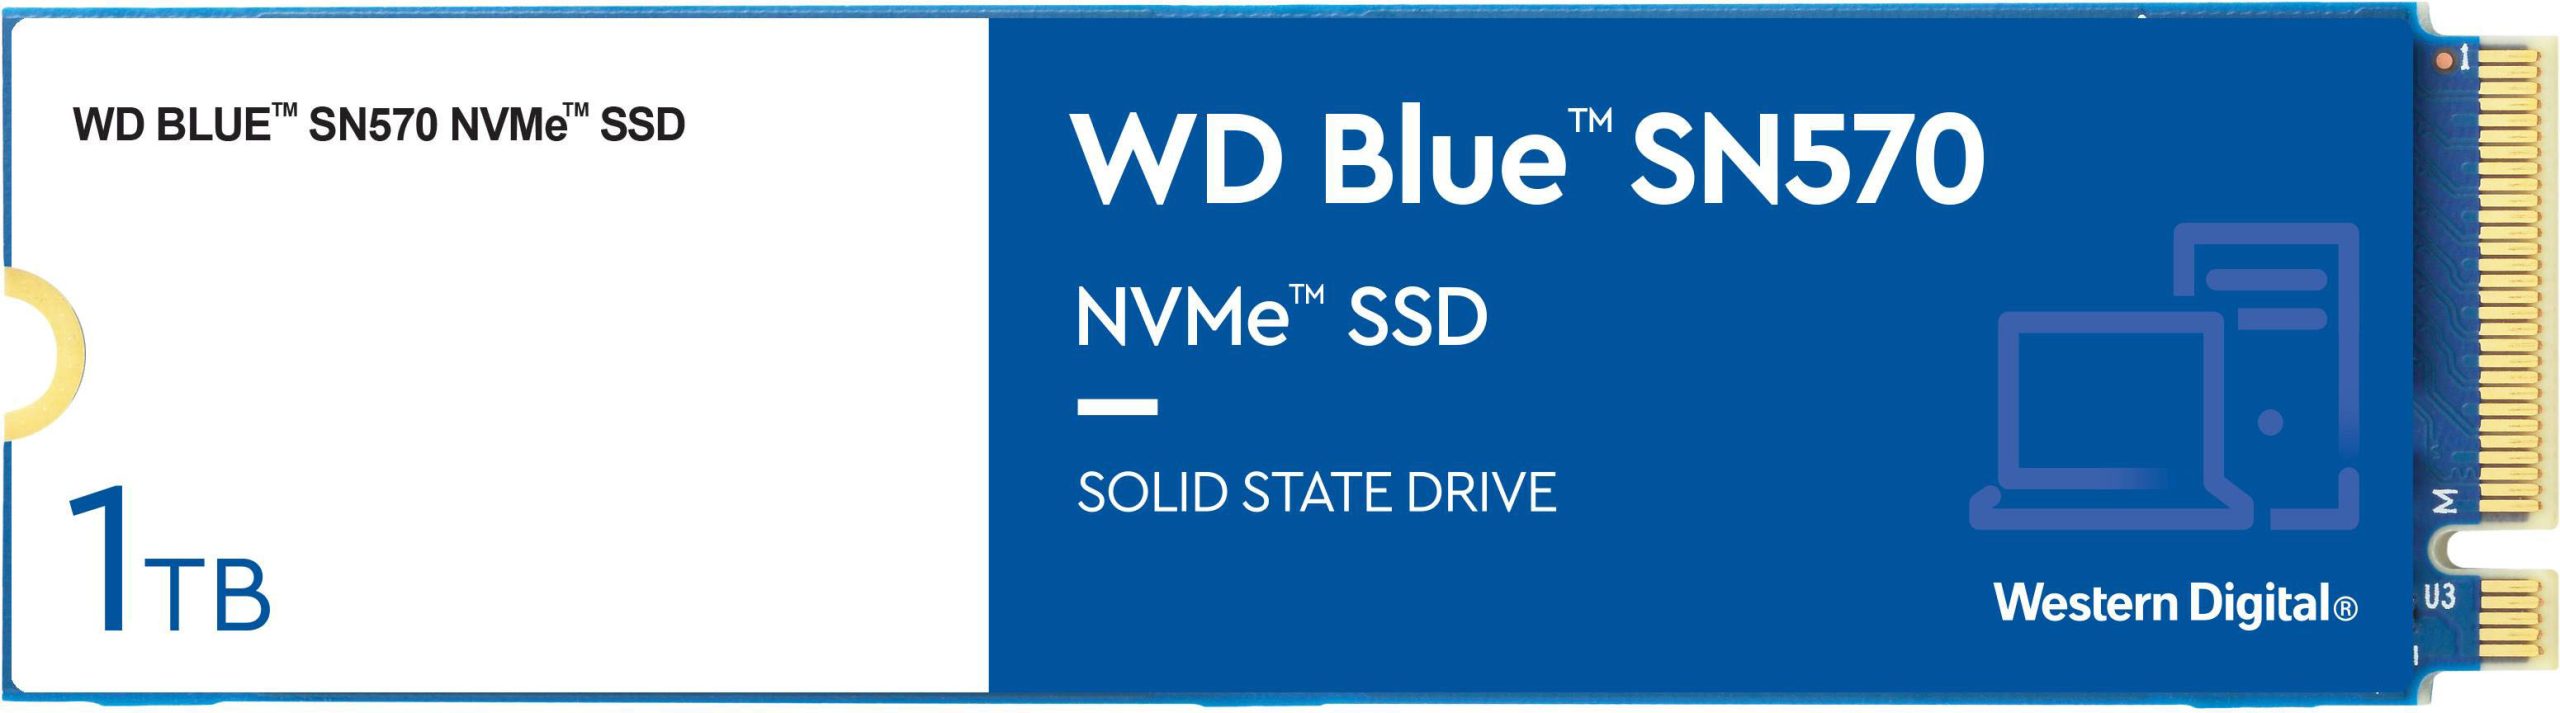 WD – Blue SN570 1TB Internal PCIe Gen3 x4 Solid State Drive for Laptops & Desktops – Just $52.99 at Best Buy